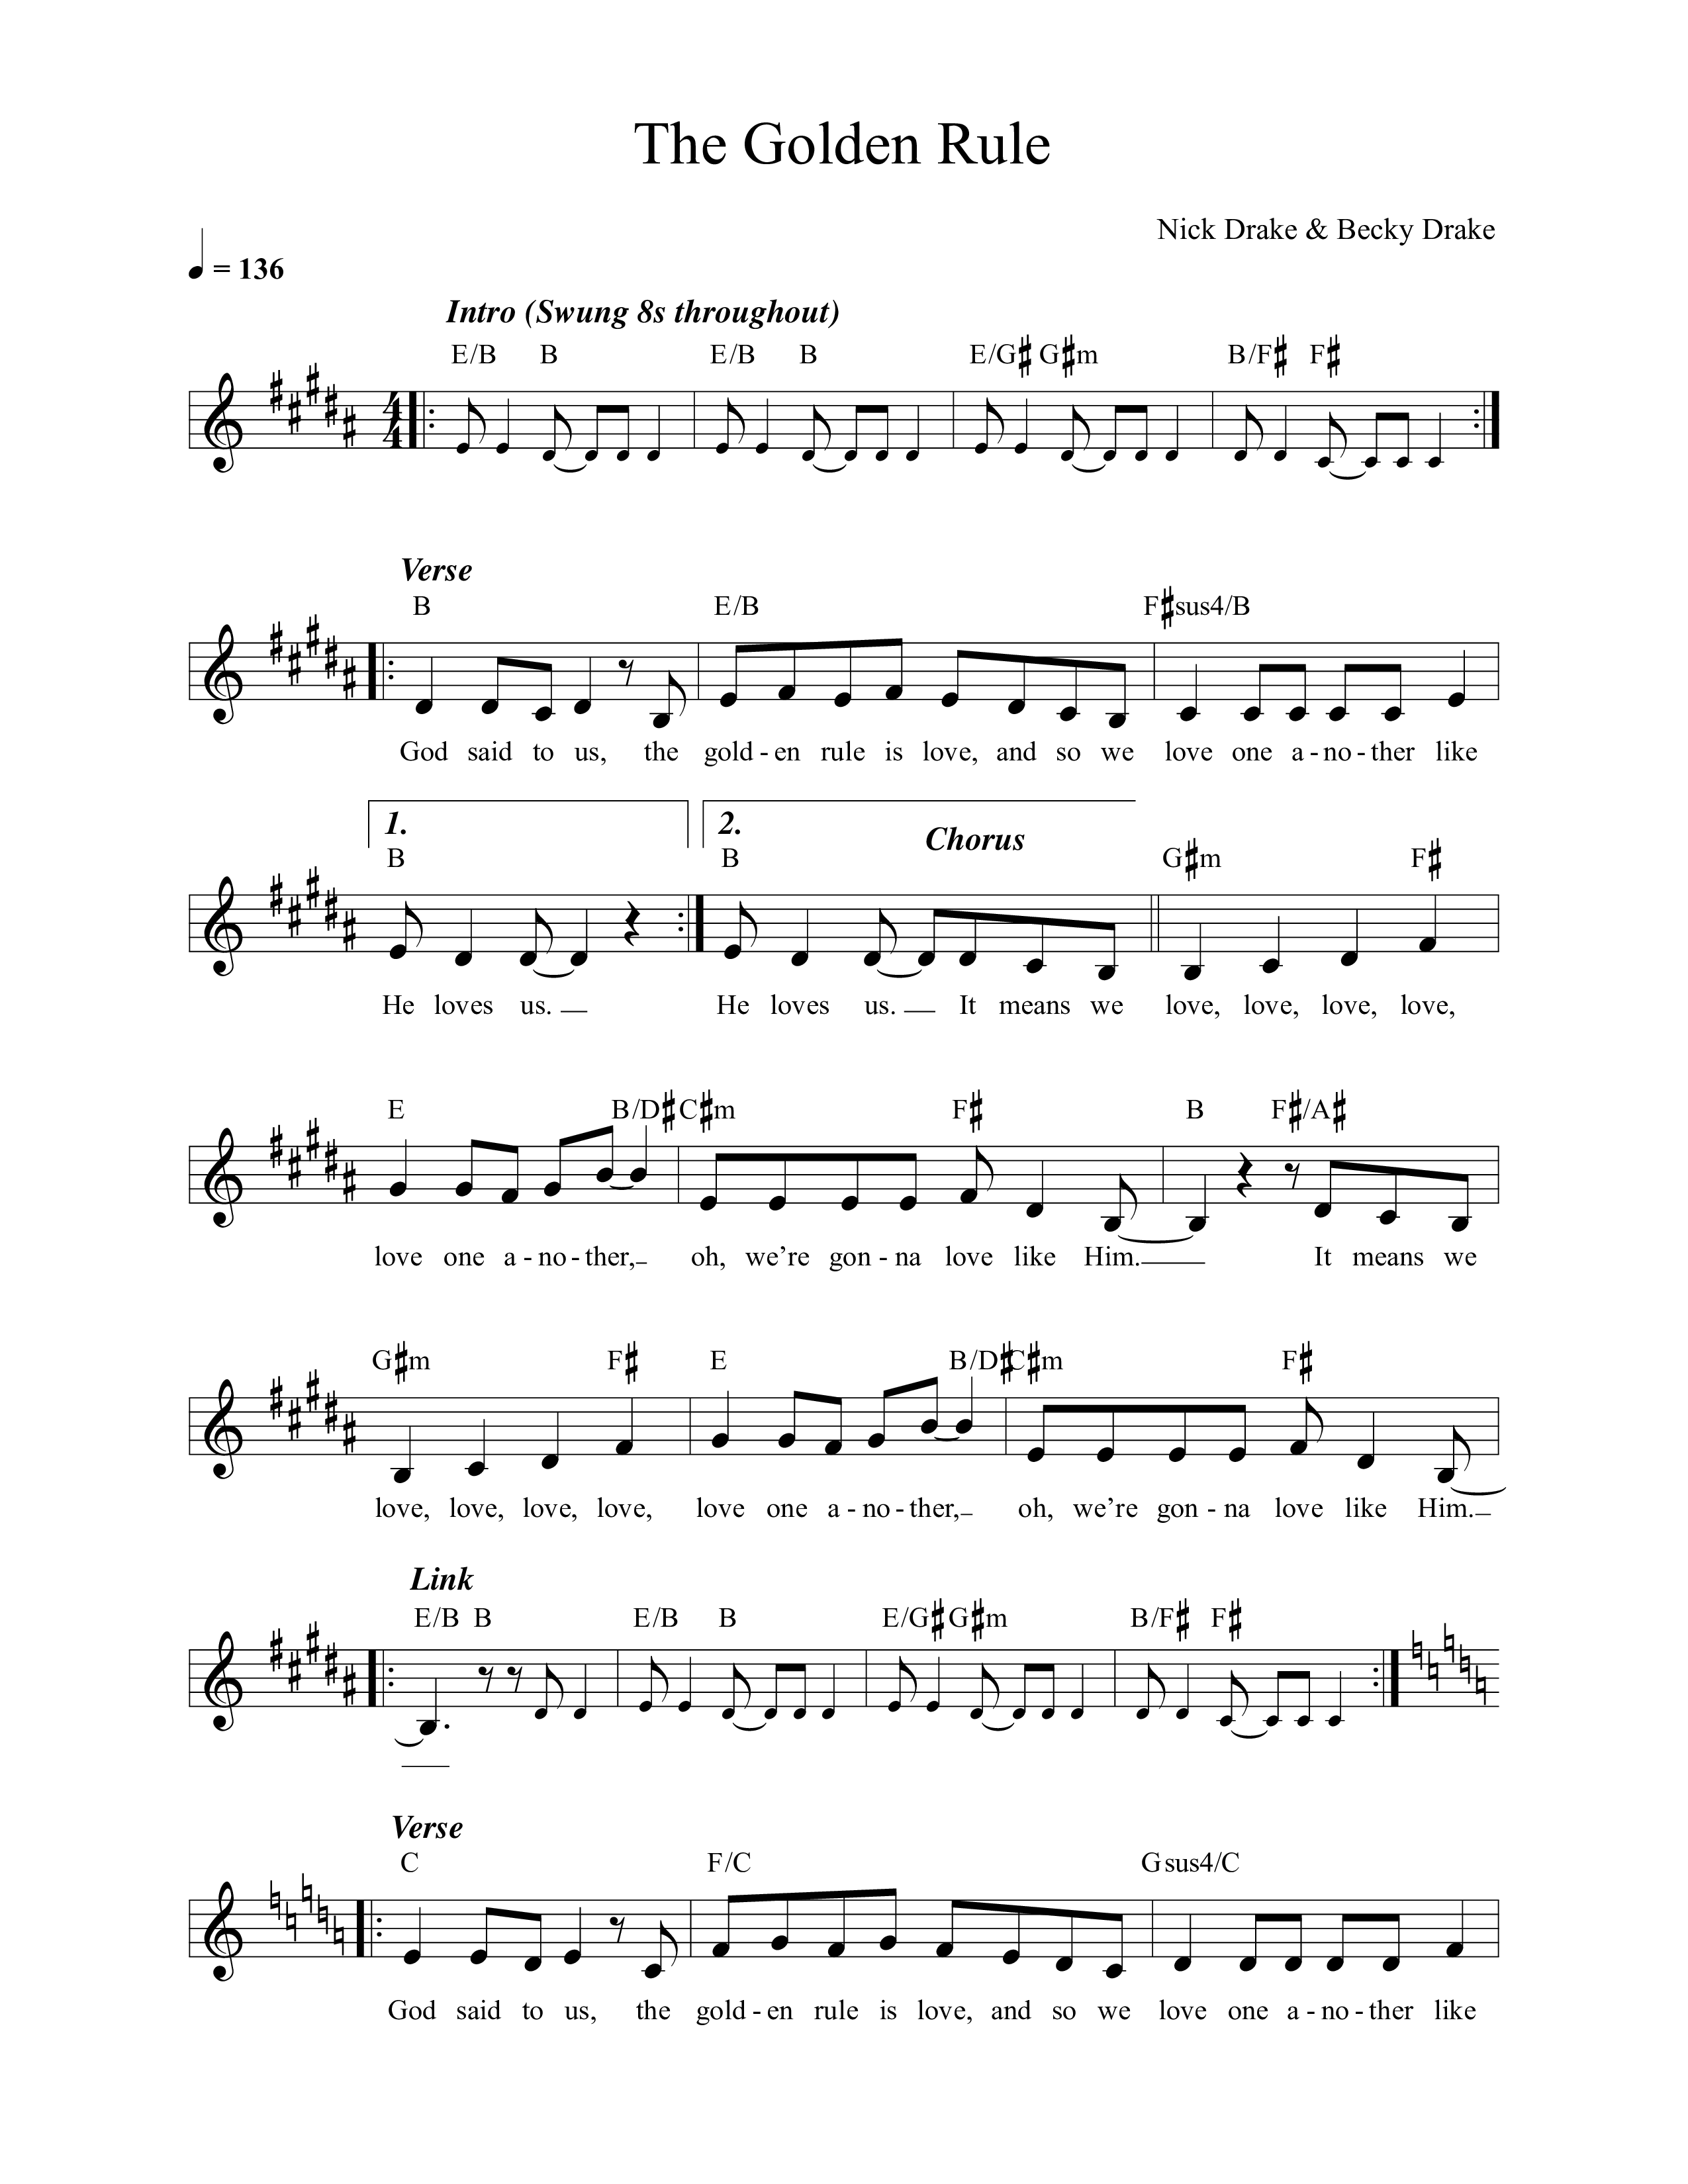 The Golden Rule (Live) Lead Sheet Melody (Worship For Everyone / Nick & Becky Drake)